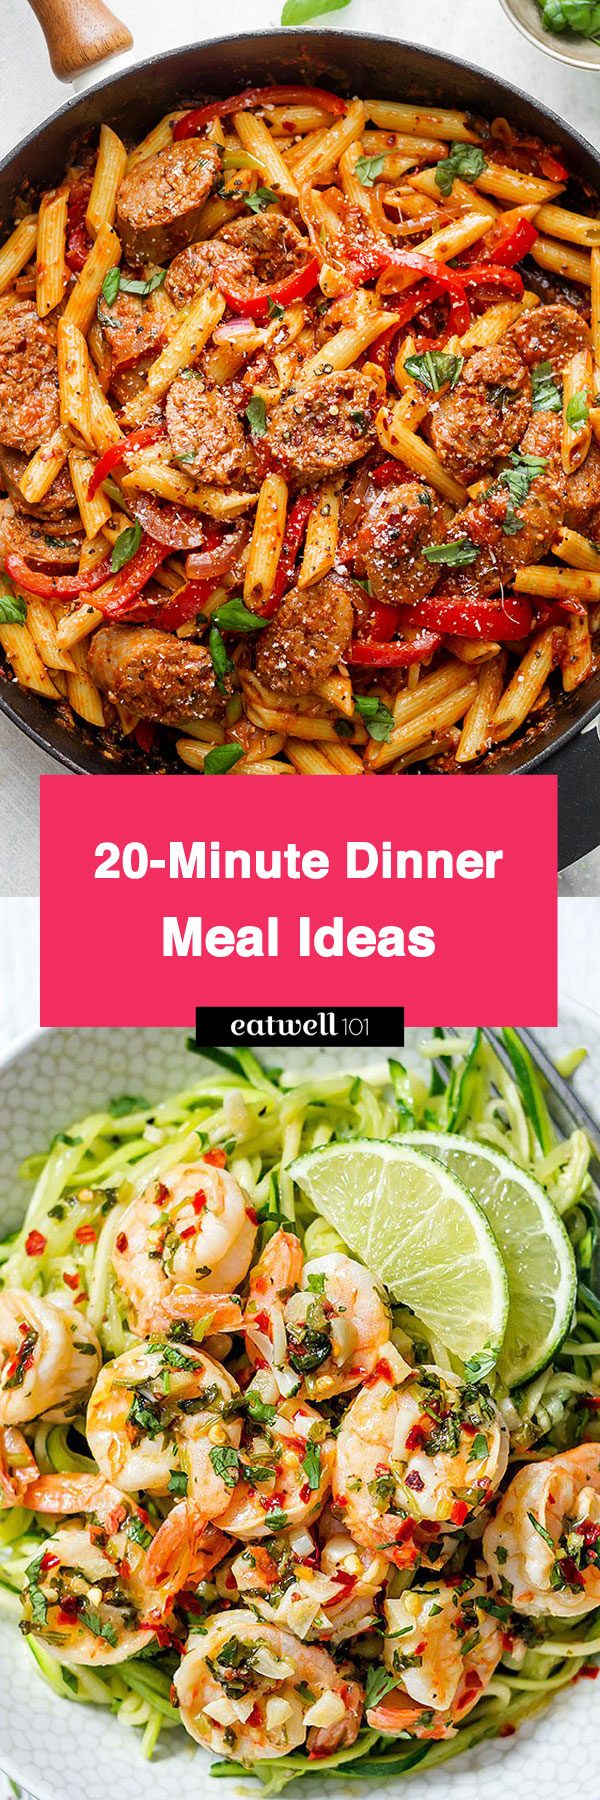 Dinner Meal Recipes: 13 Delicious Dinner Meal Ideas Ready ...